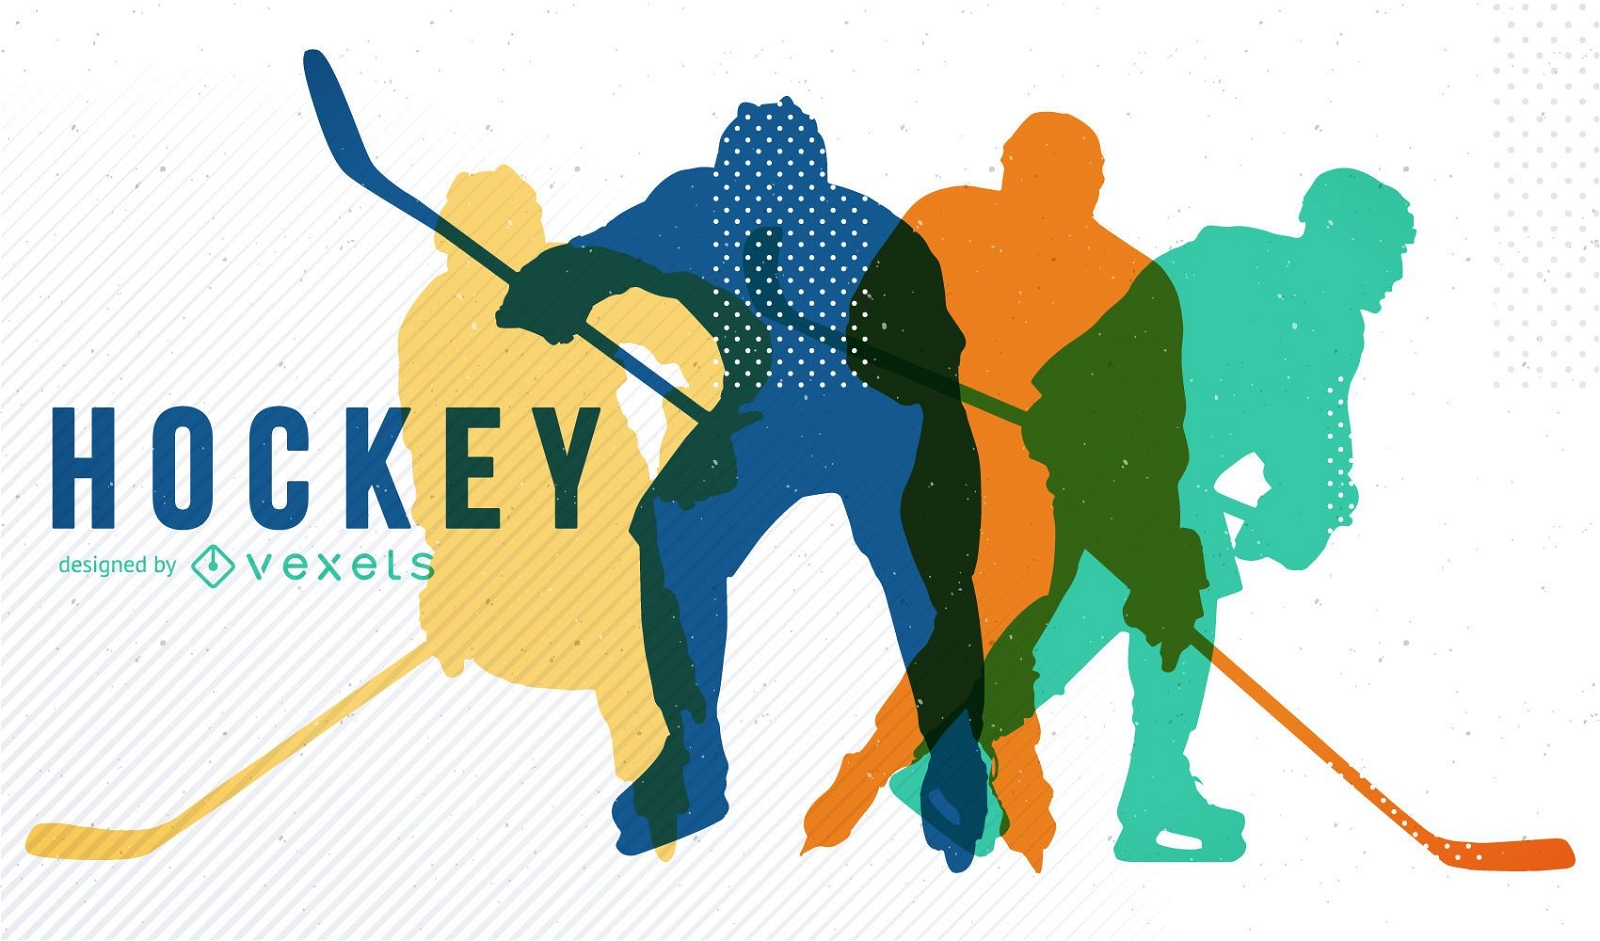 Hockey design with silhouettes